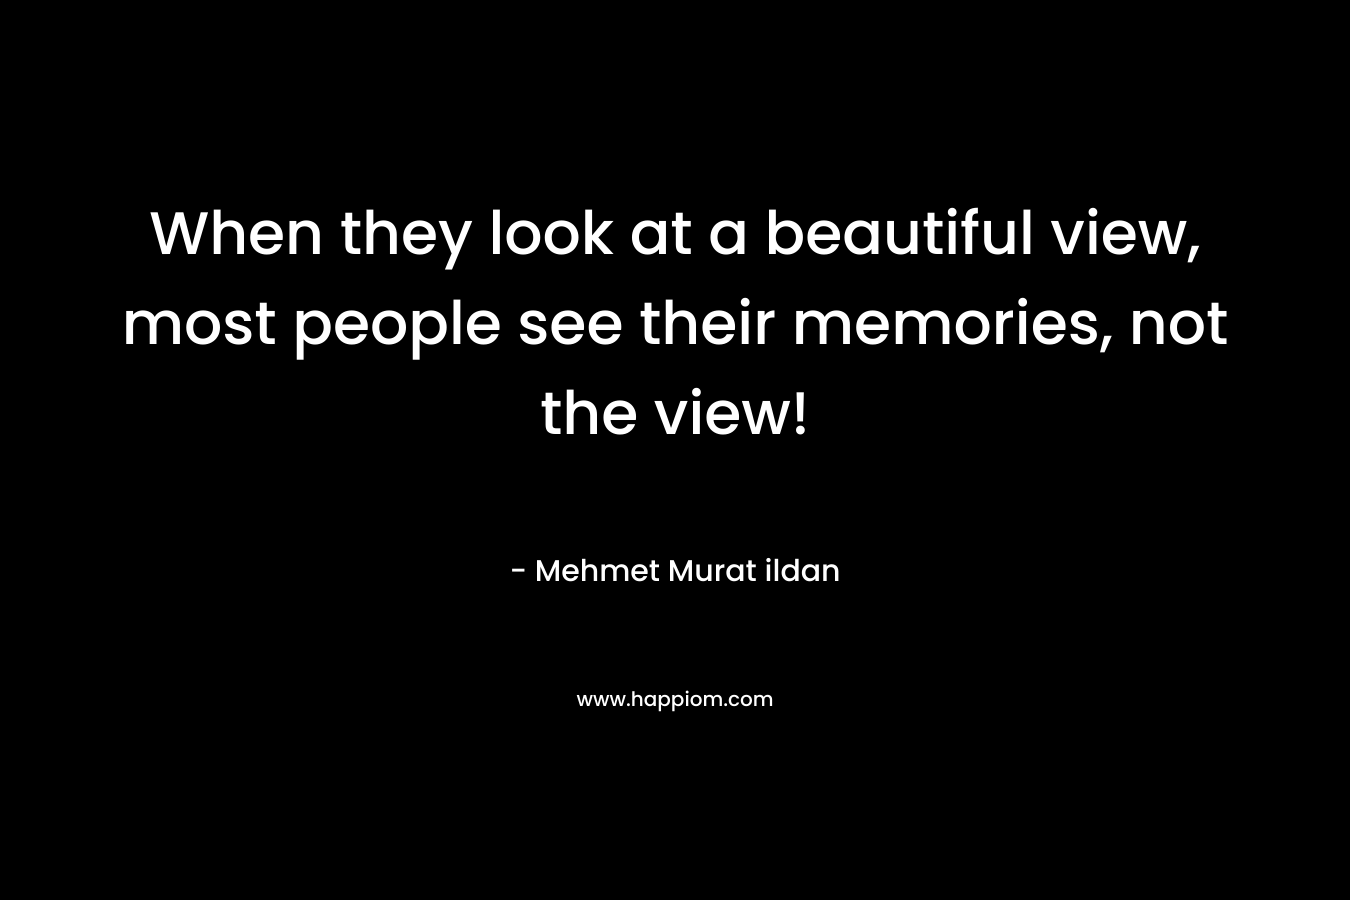 When they look at a beautiful view, most people see their memories, not the view!